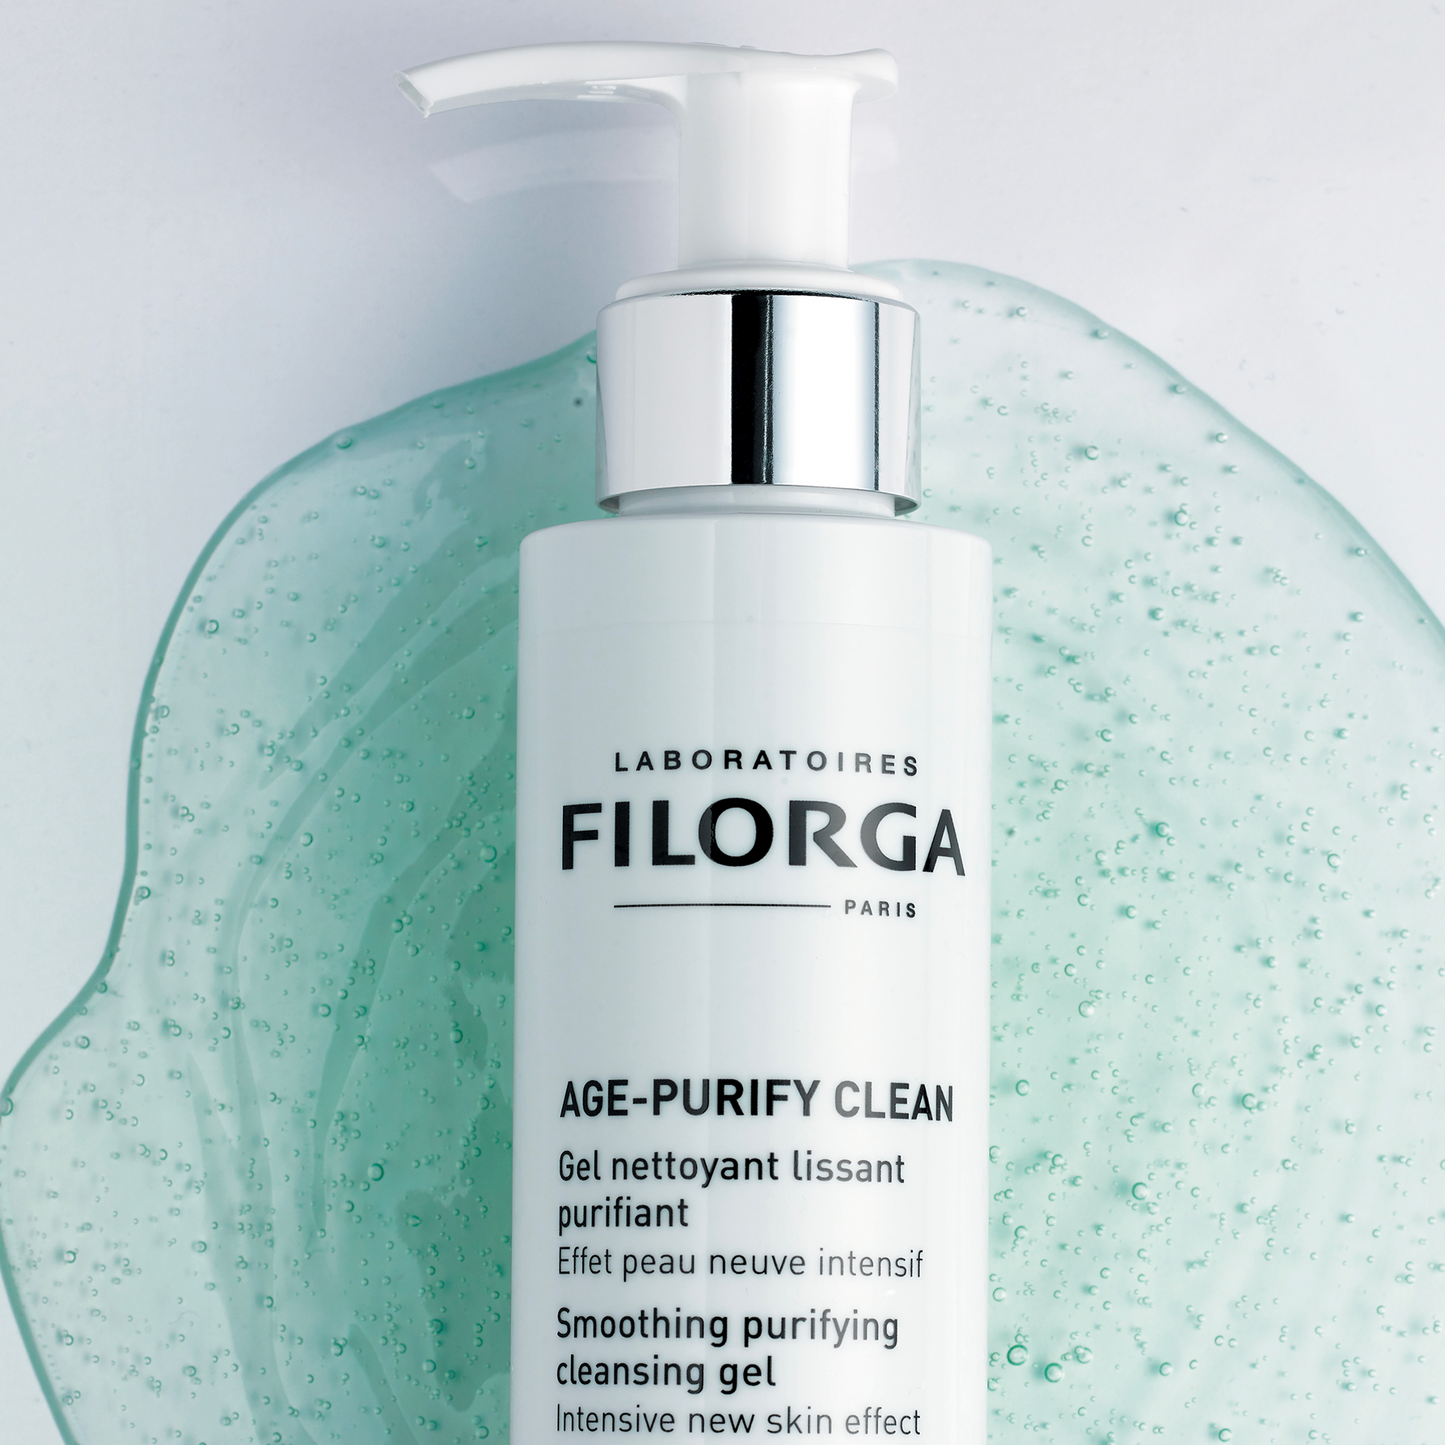 FILORGA AGE-PURIFY CLEAN pump bottle with green gel cleanser texture background